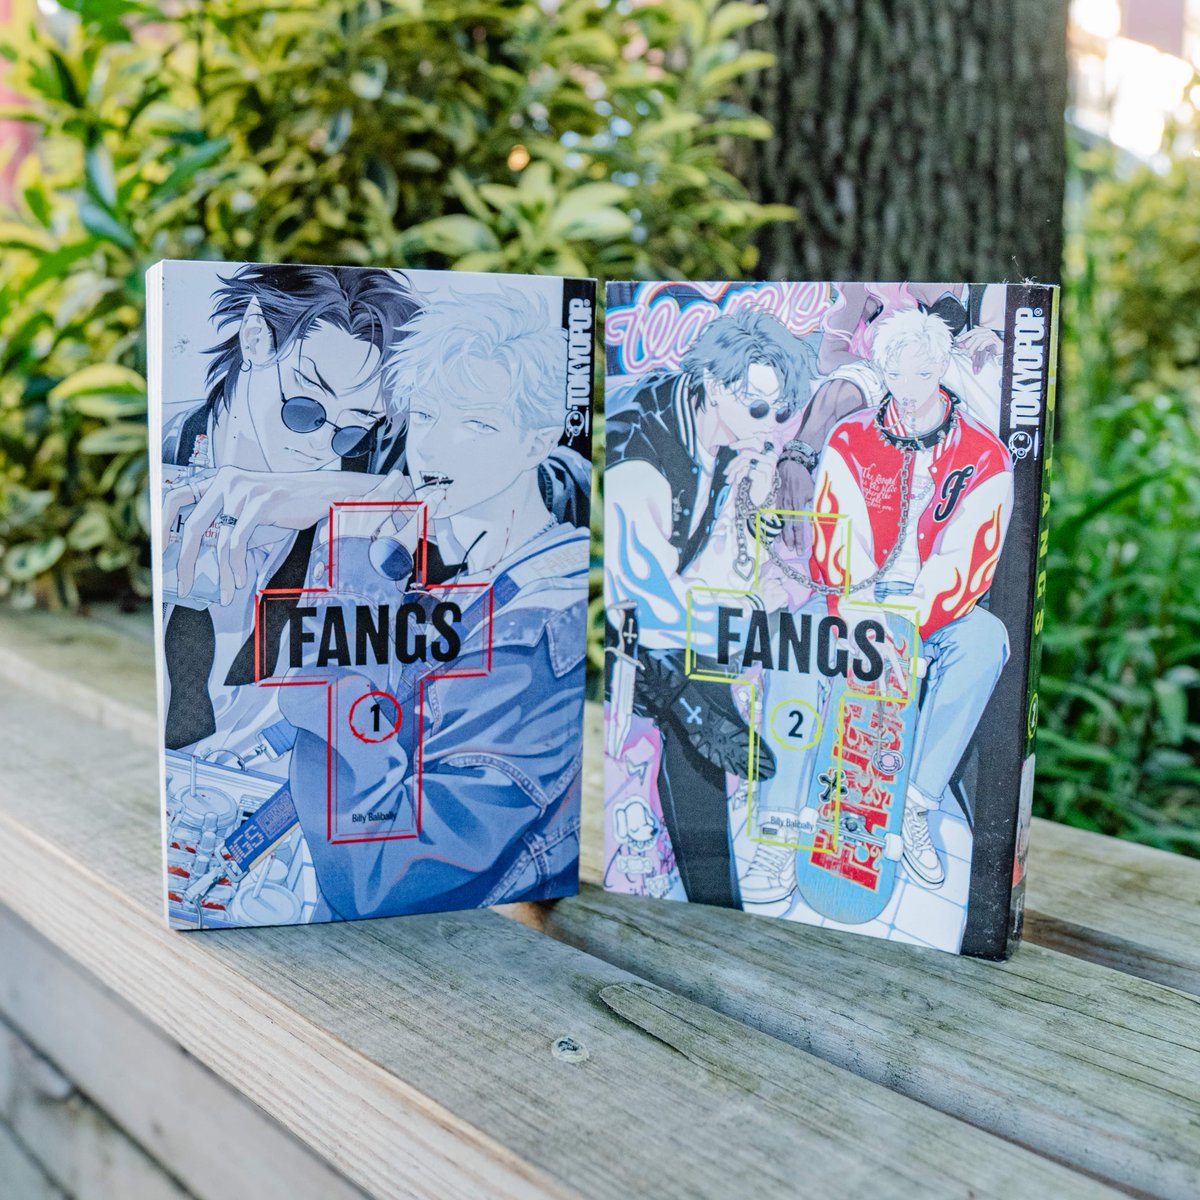 Attention all fans of FANGS! 🧛

We are happy to share that the highly anticipated Volume 3 of FANGS by Billy Balibally is coming soon! Look forward to further details once it becomes available for pre-order!